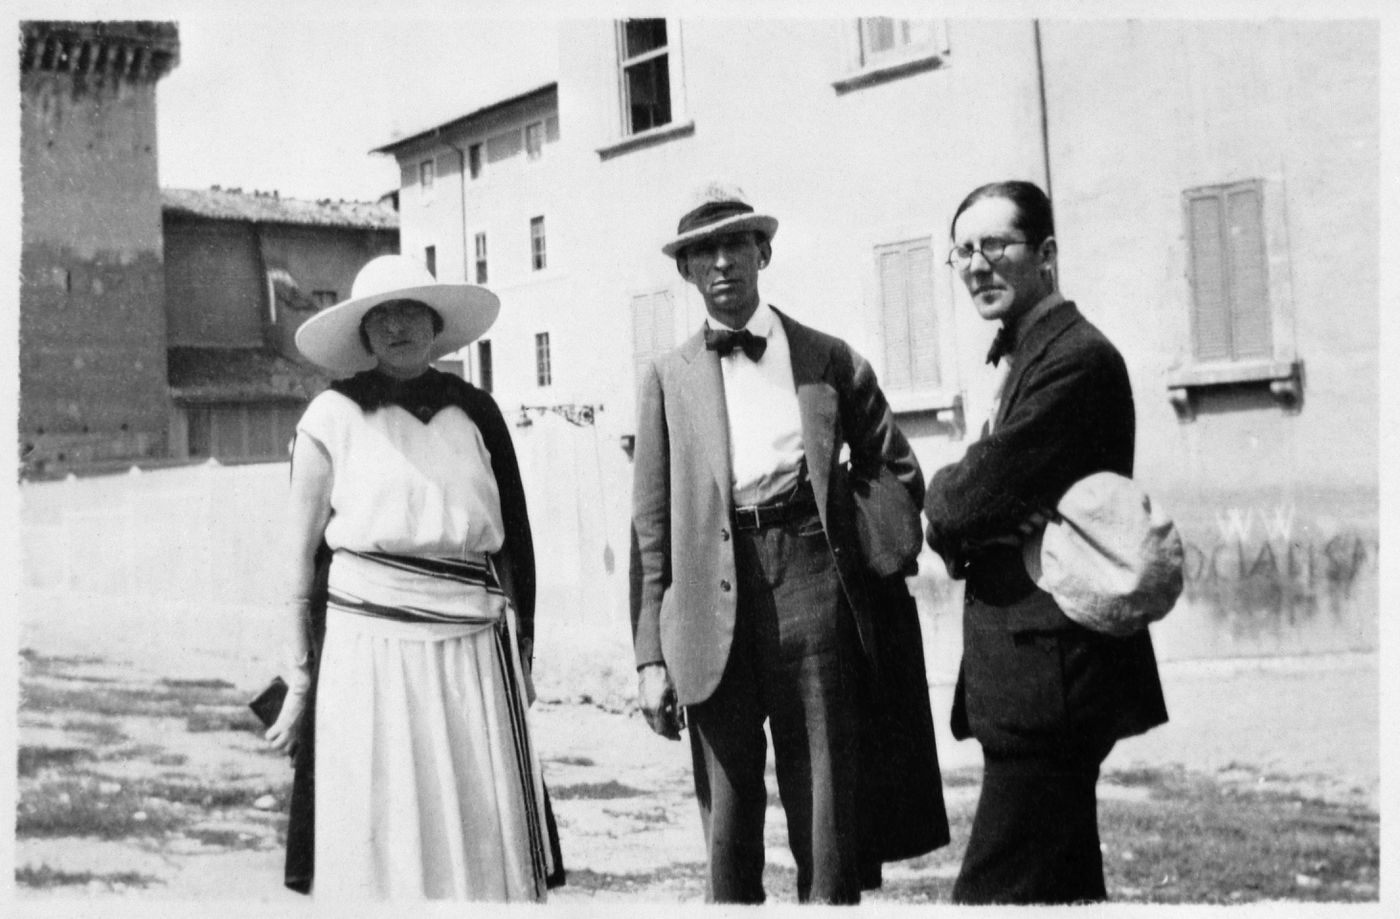 Germaine Bongard, Amédée Ozenfant and Le Corbusier during their visit to Rome